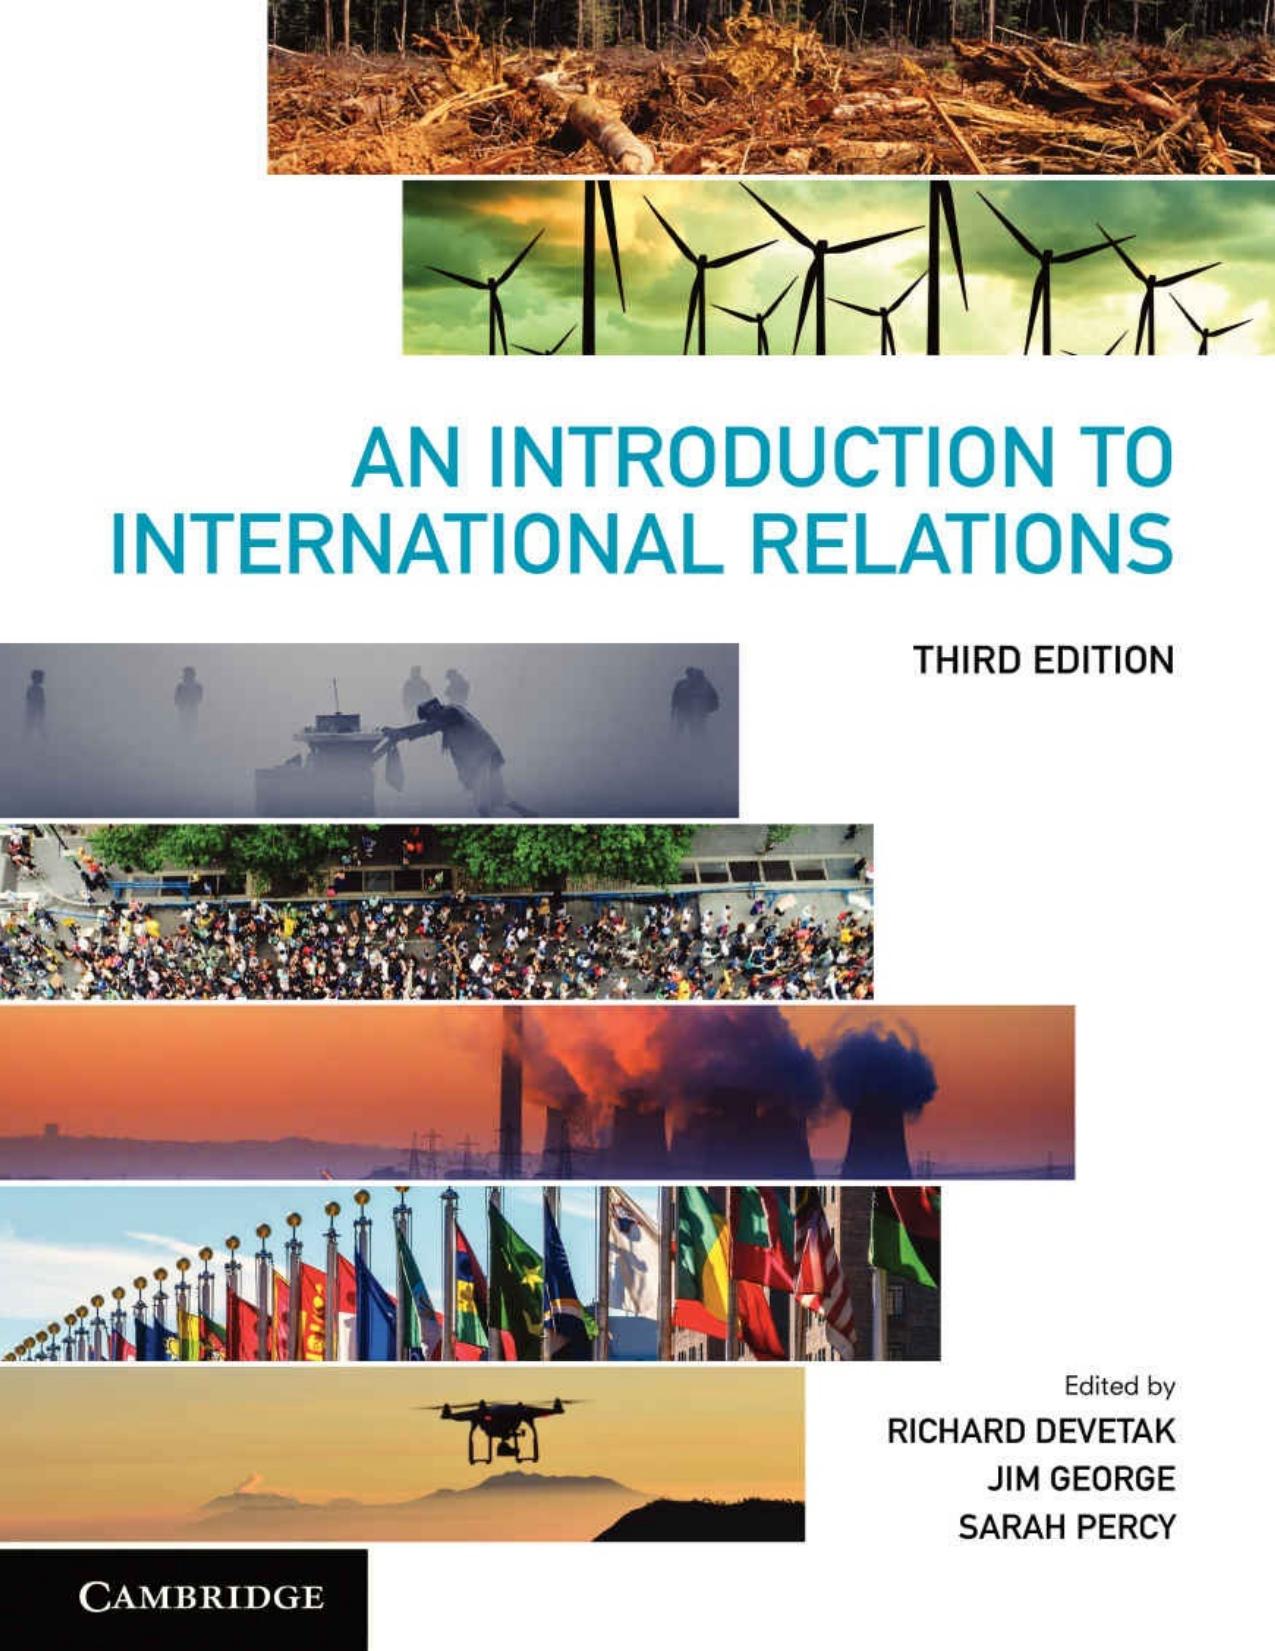 An Introduction to International Relations - PDFDrive.com